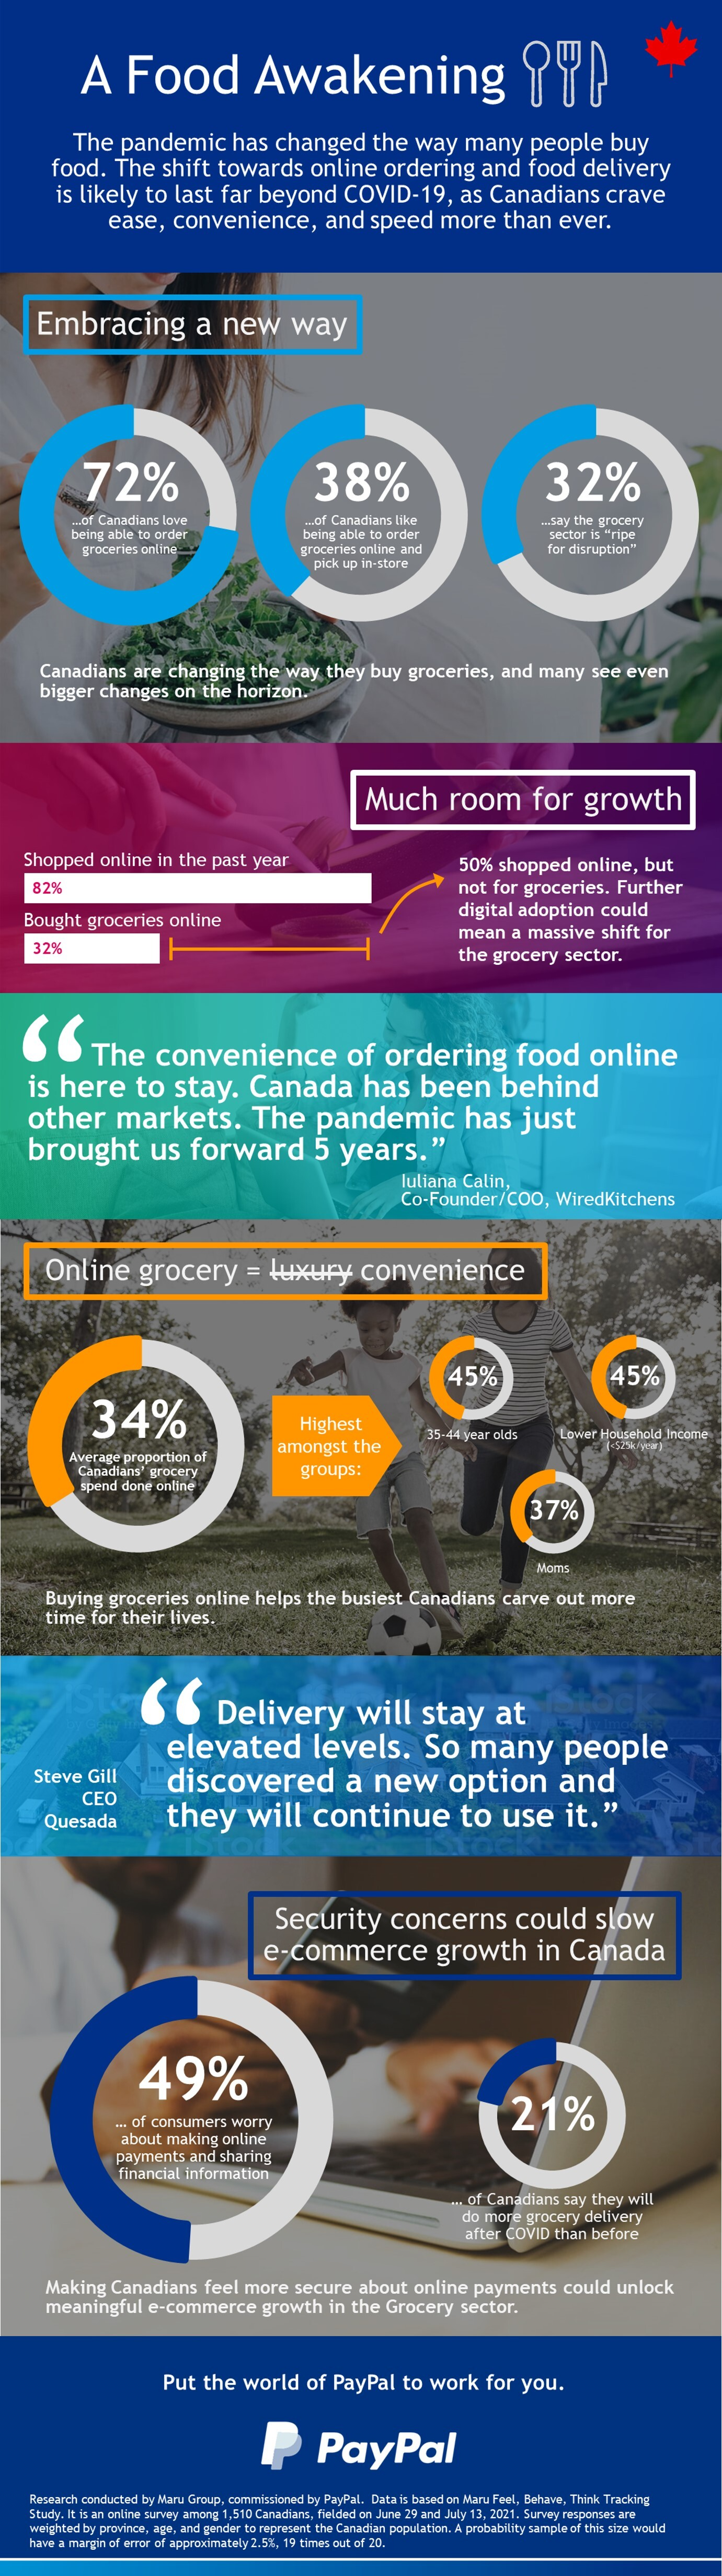 An infographic showing how food buying and consumption habits have changed since the Covid-19 pandemic